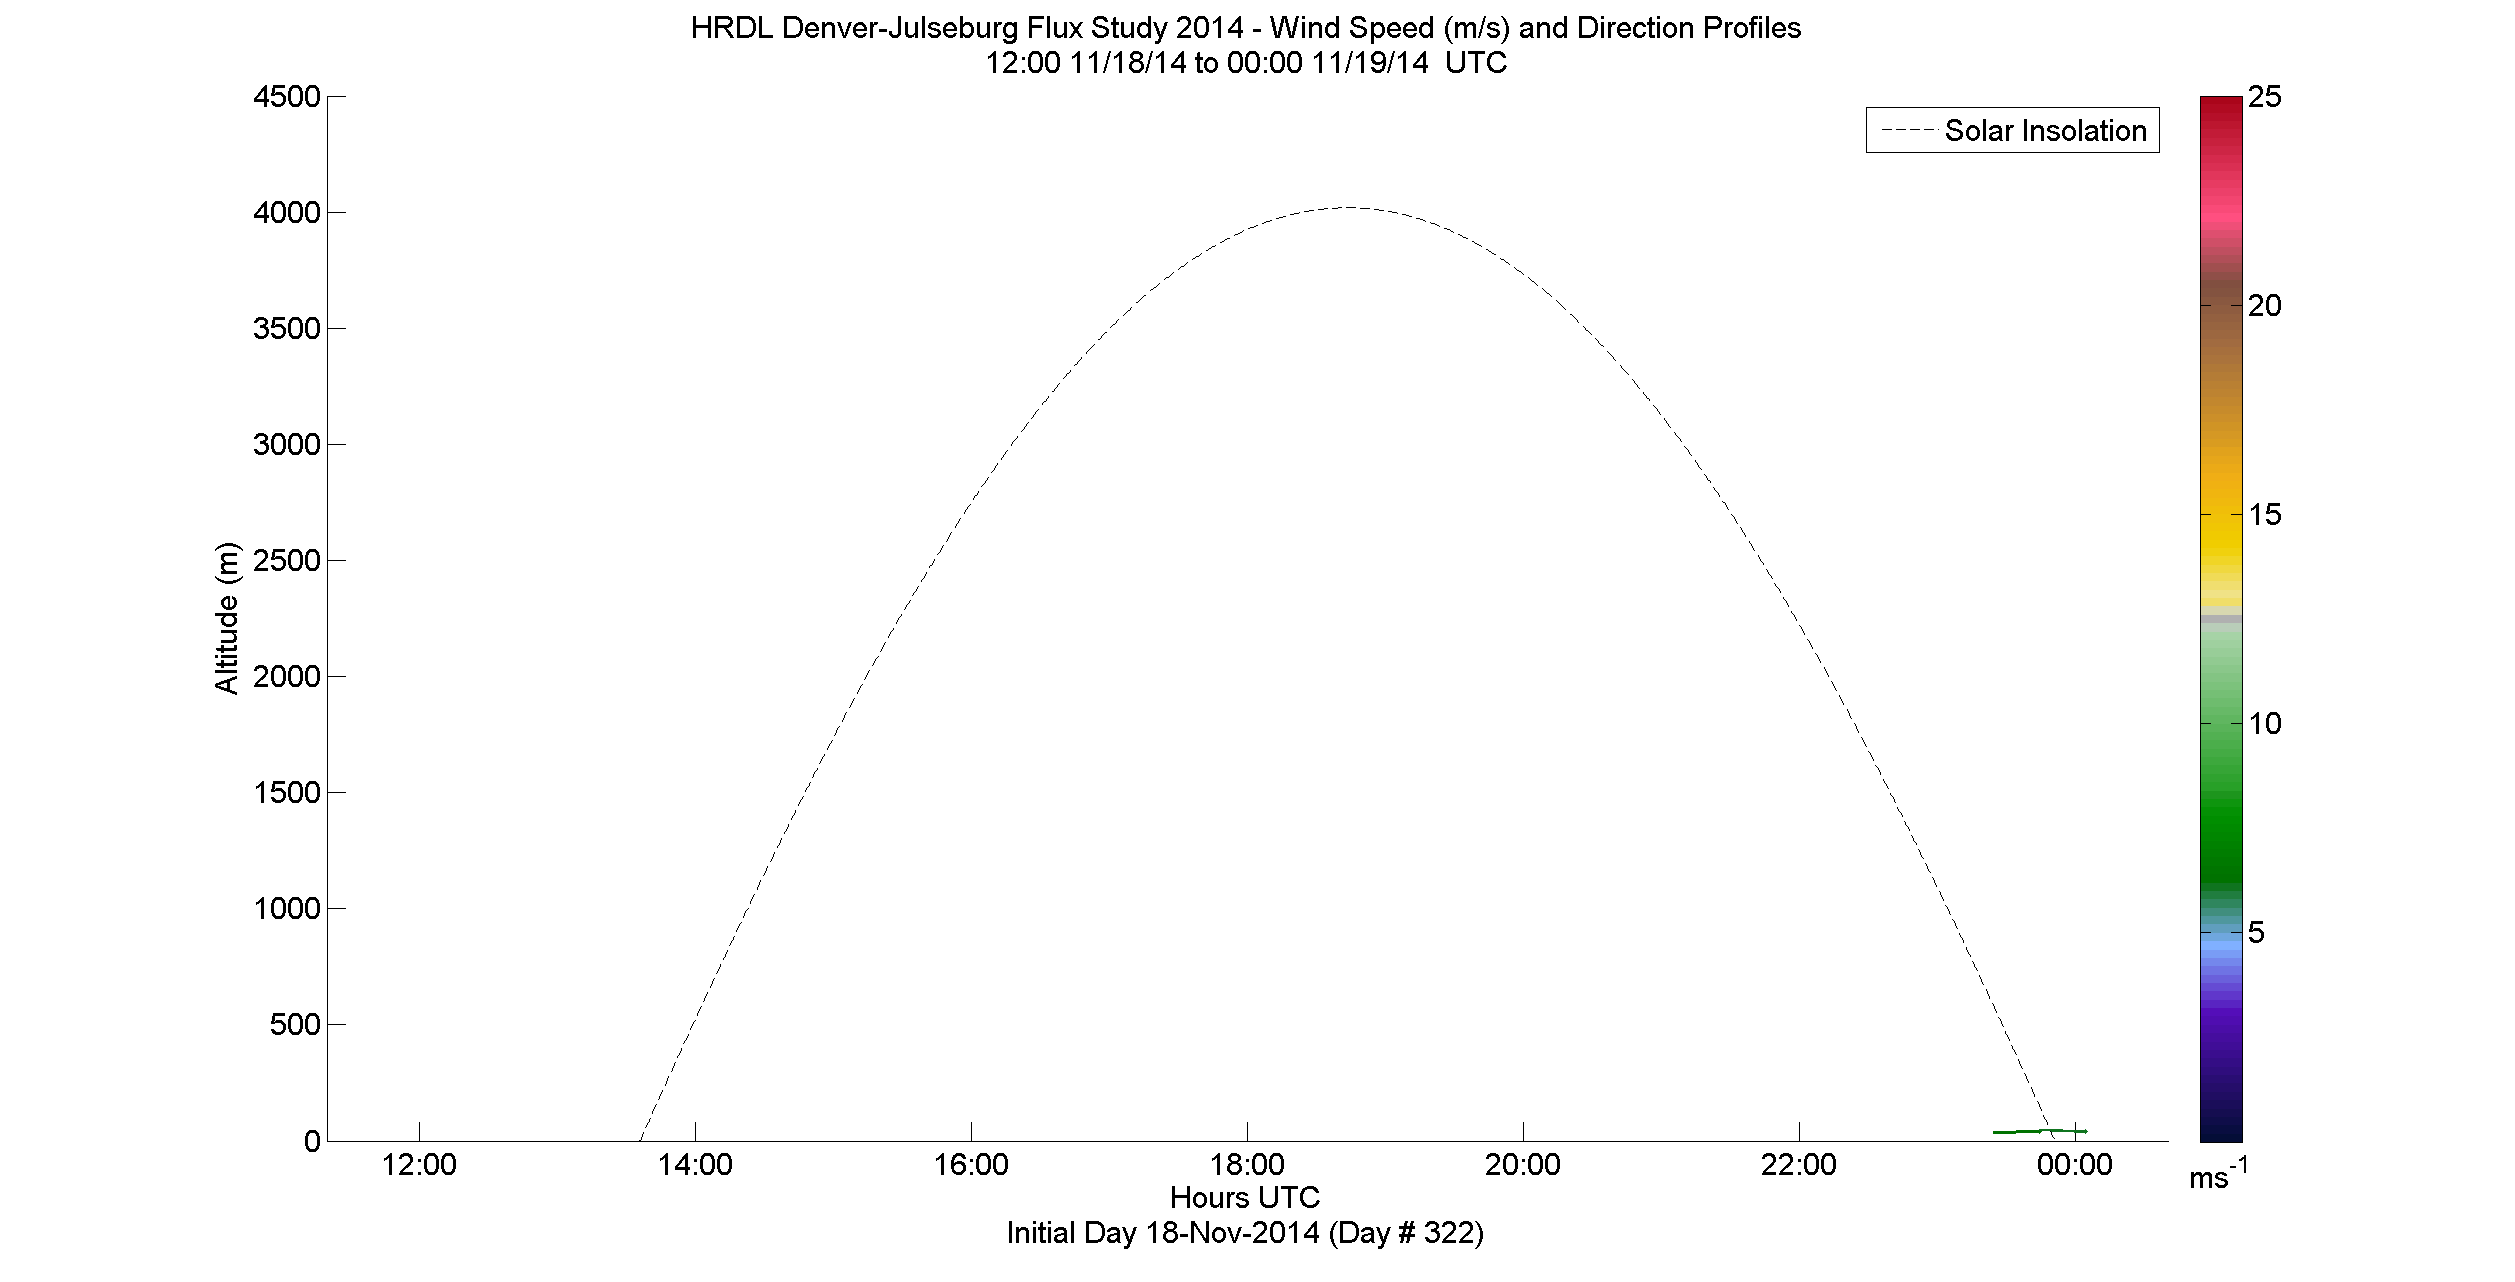 HRDL speed and direction profile - November 18 pm